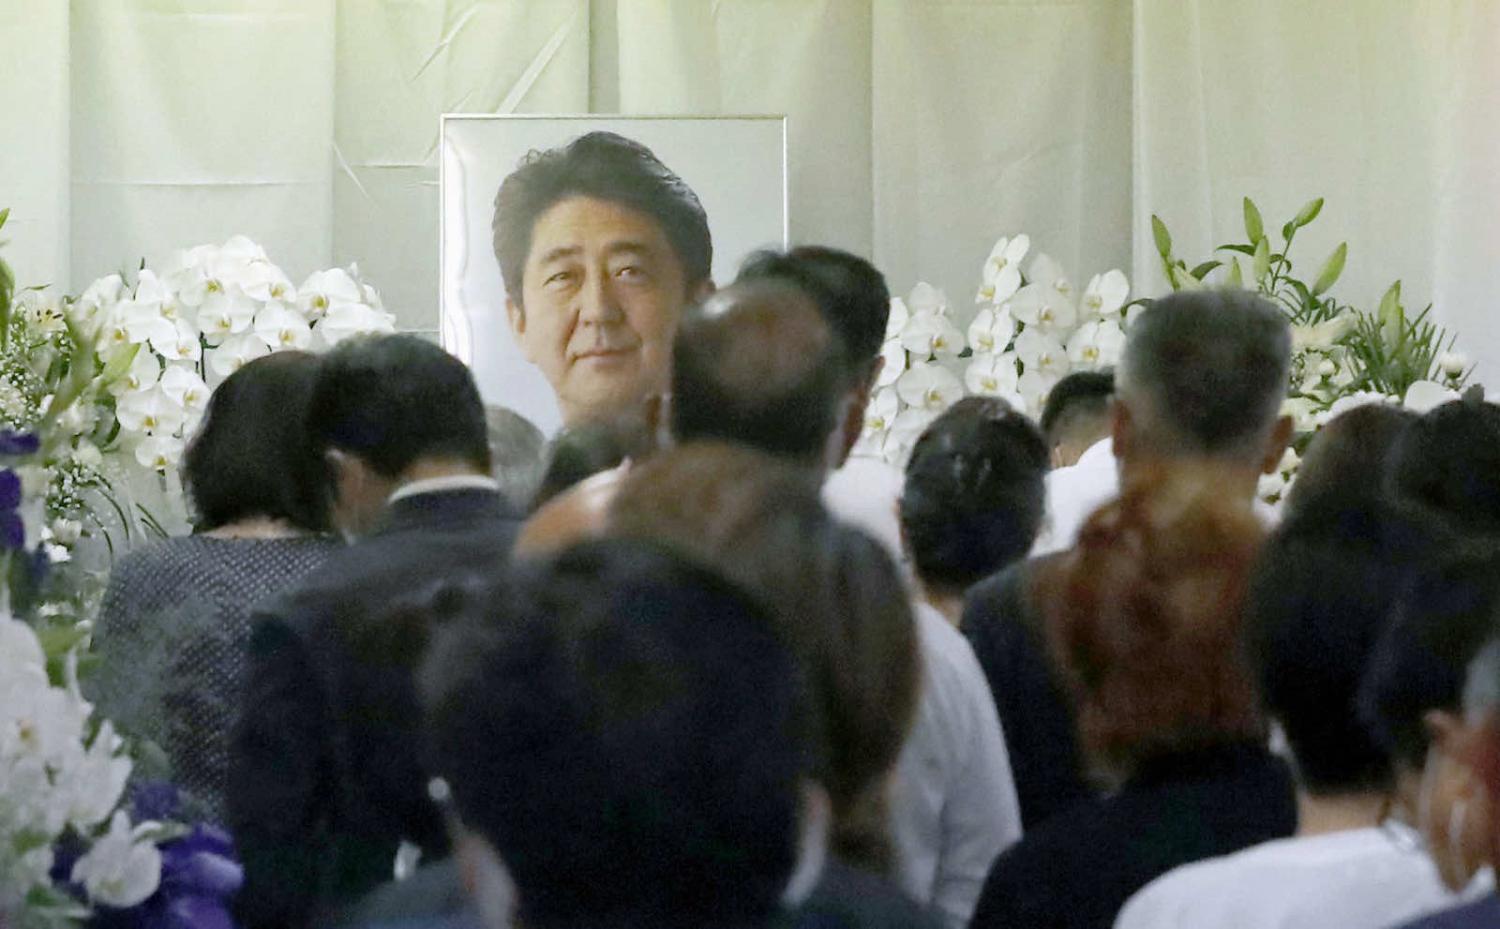 A memorial for Japan’s slain former prime minister Abe Shinzo in Shimonoseki, Yamaguchi Prefecture, his electoral base, on 12 July (Kyodo News via Getty Images)